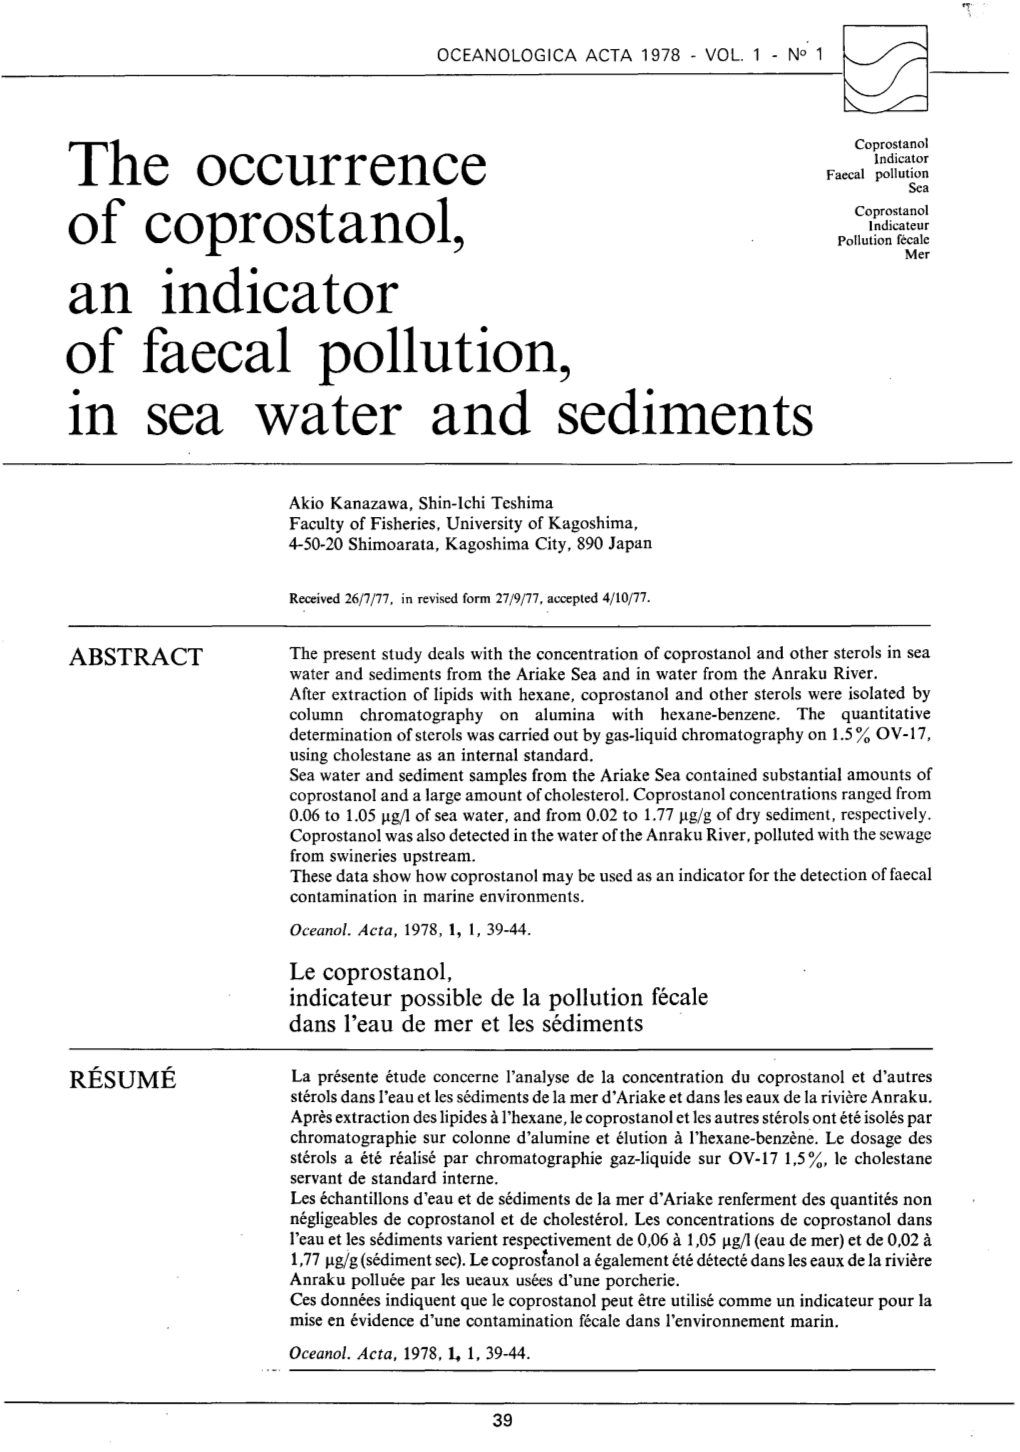 The Occurrence of Coprostanol, an Indicator of Faecal Pollution in Sea